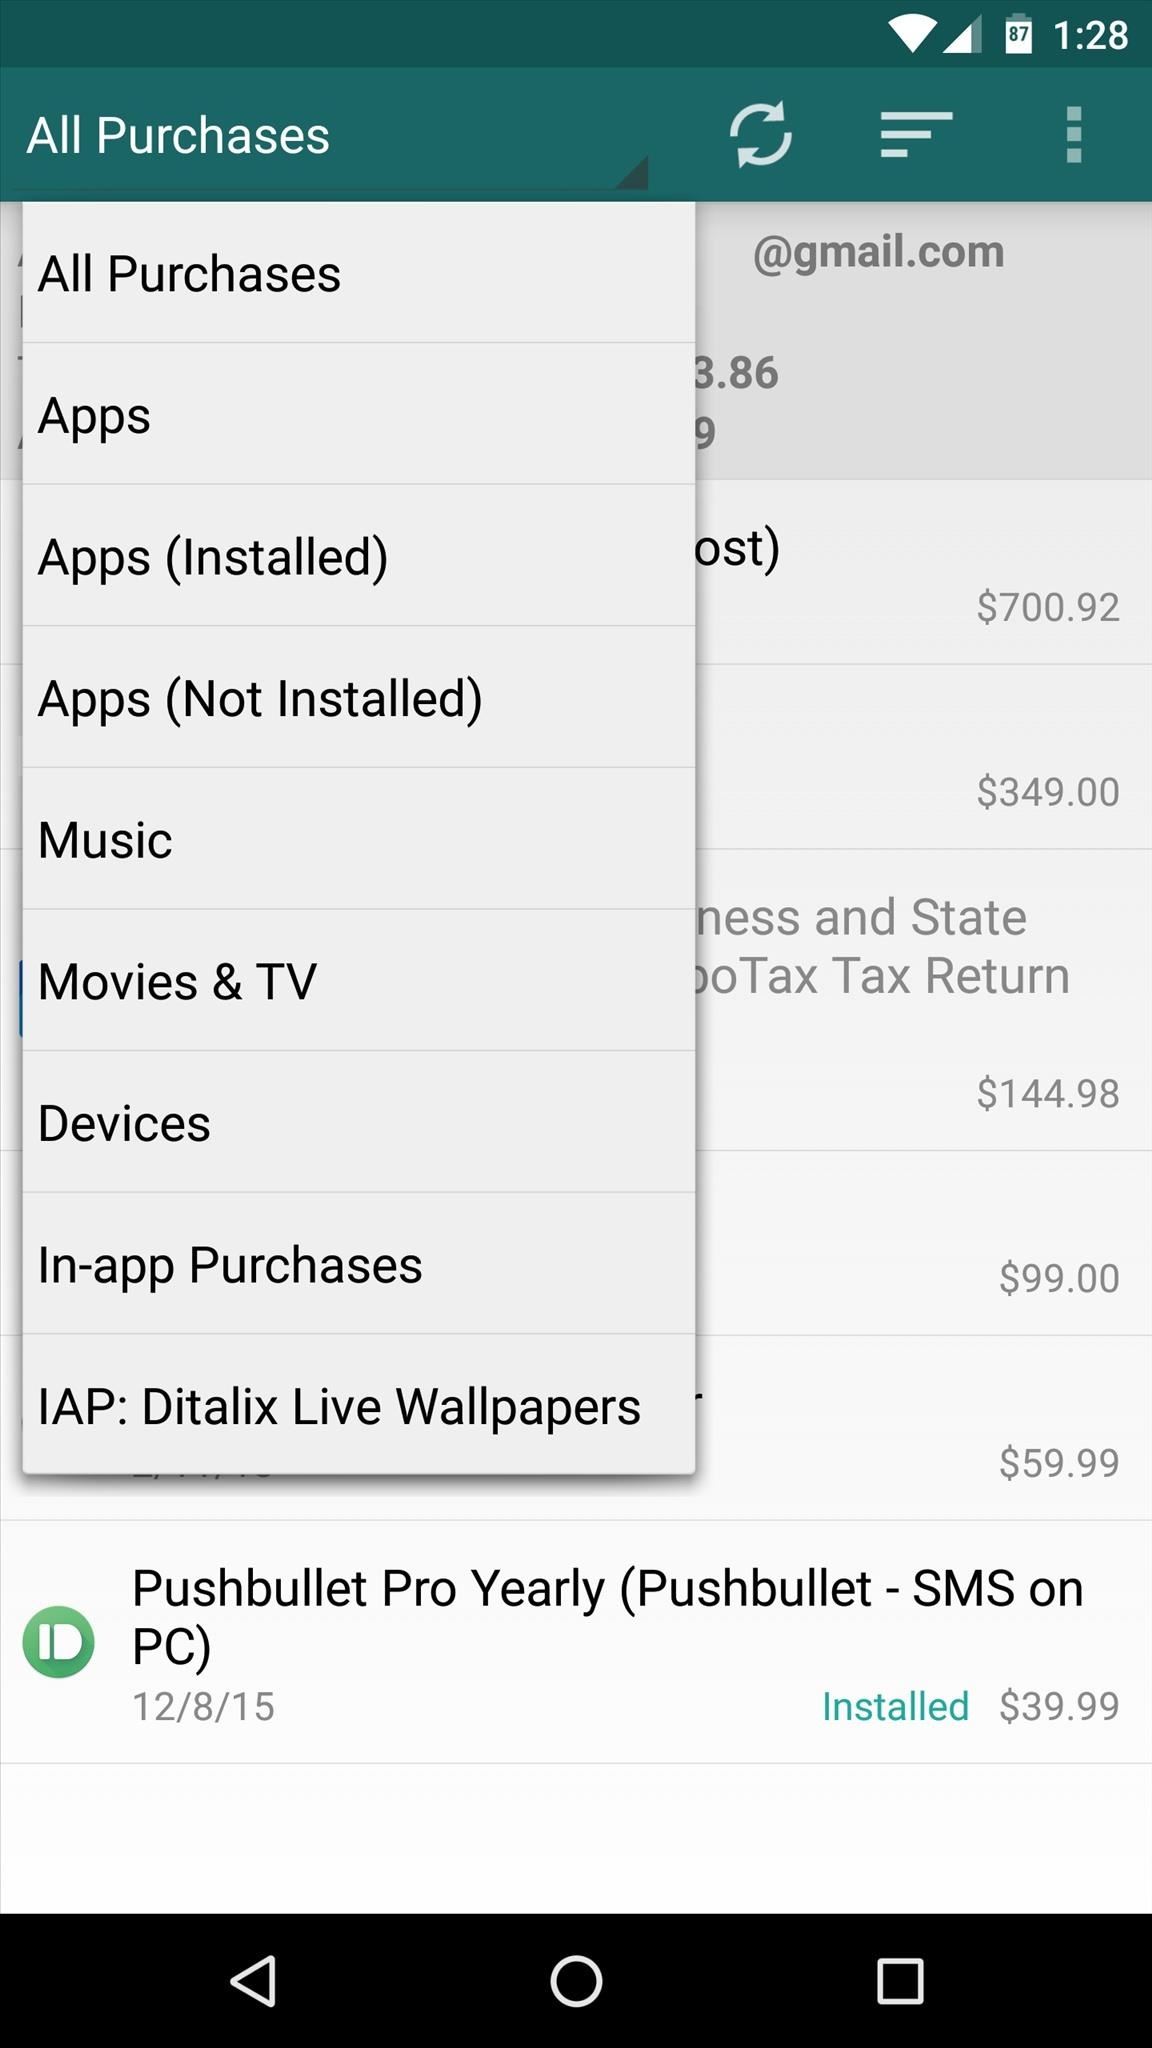 How to See Your Google Play Store Spending History